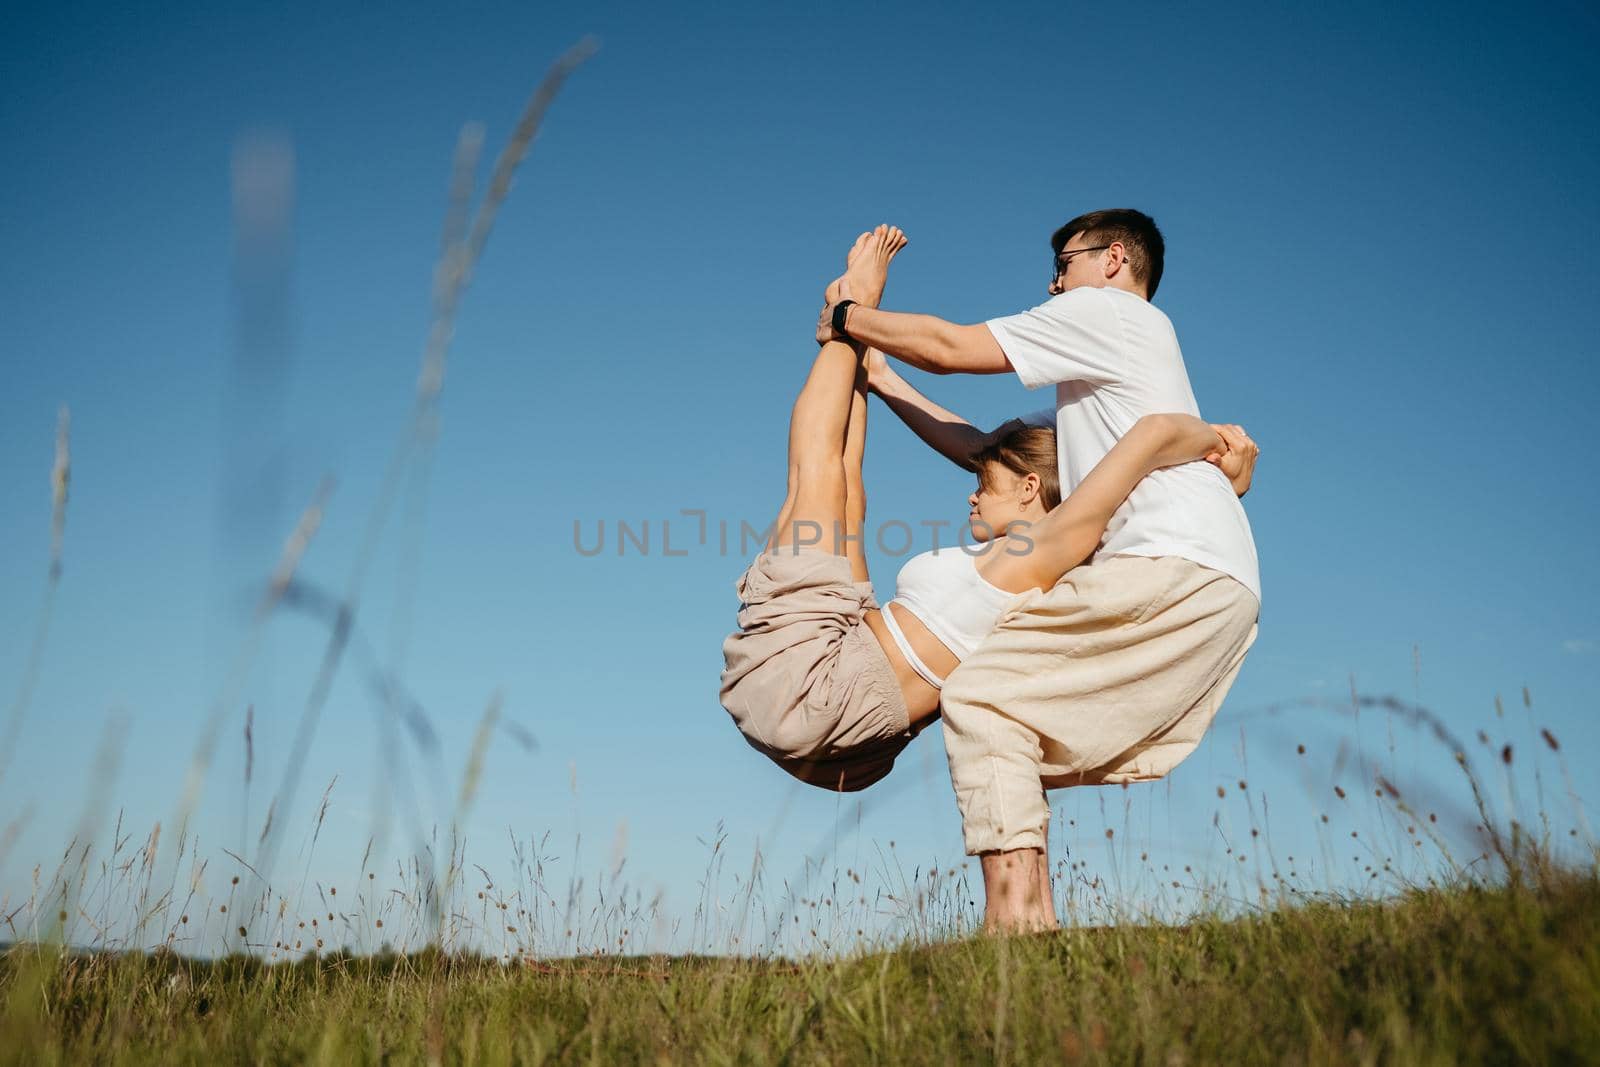 Man and Woman Dressed Alike Doing Difficult Pose While Practicing Yoga Outdoors in the Field with Blue Sky on Background